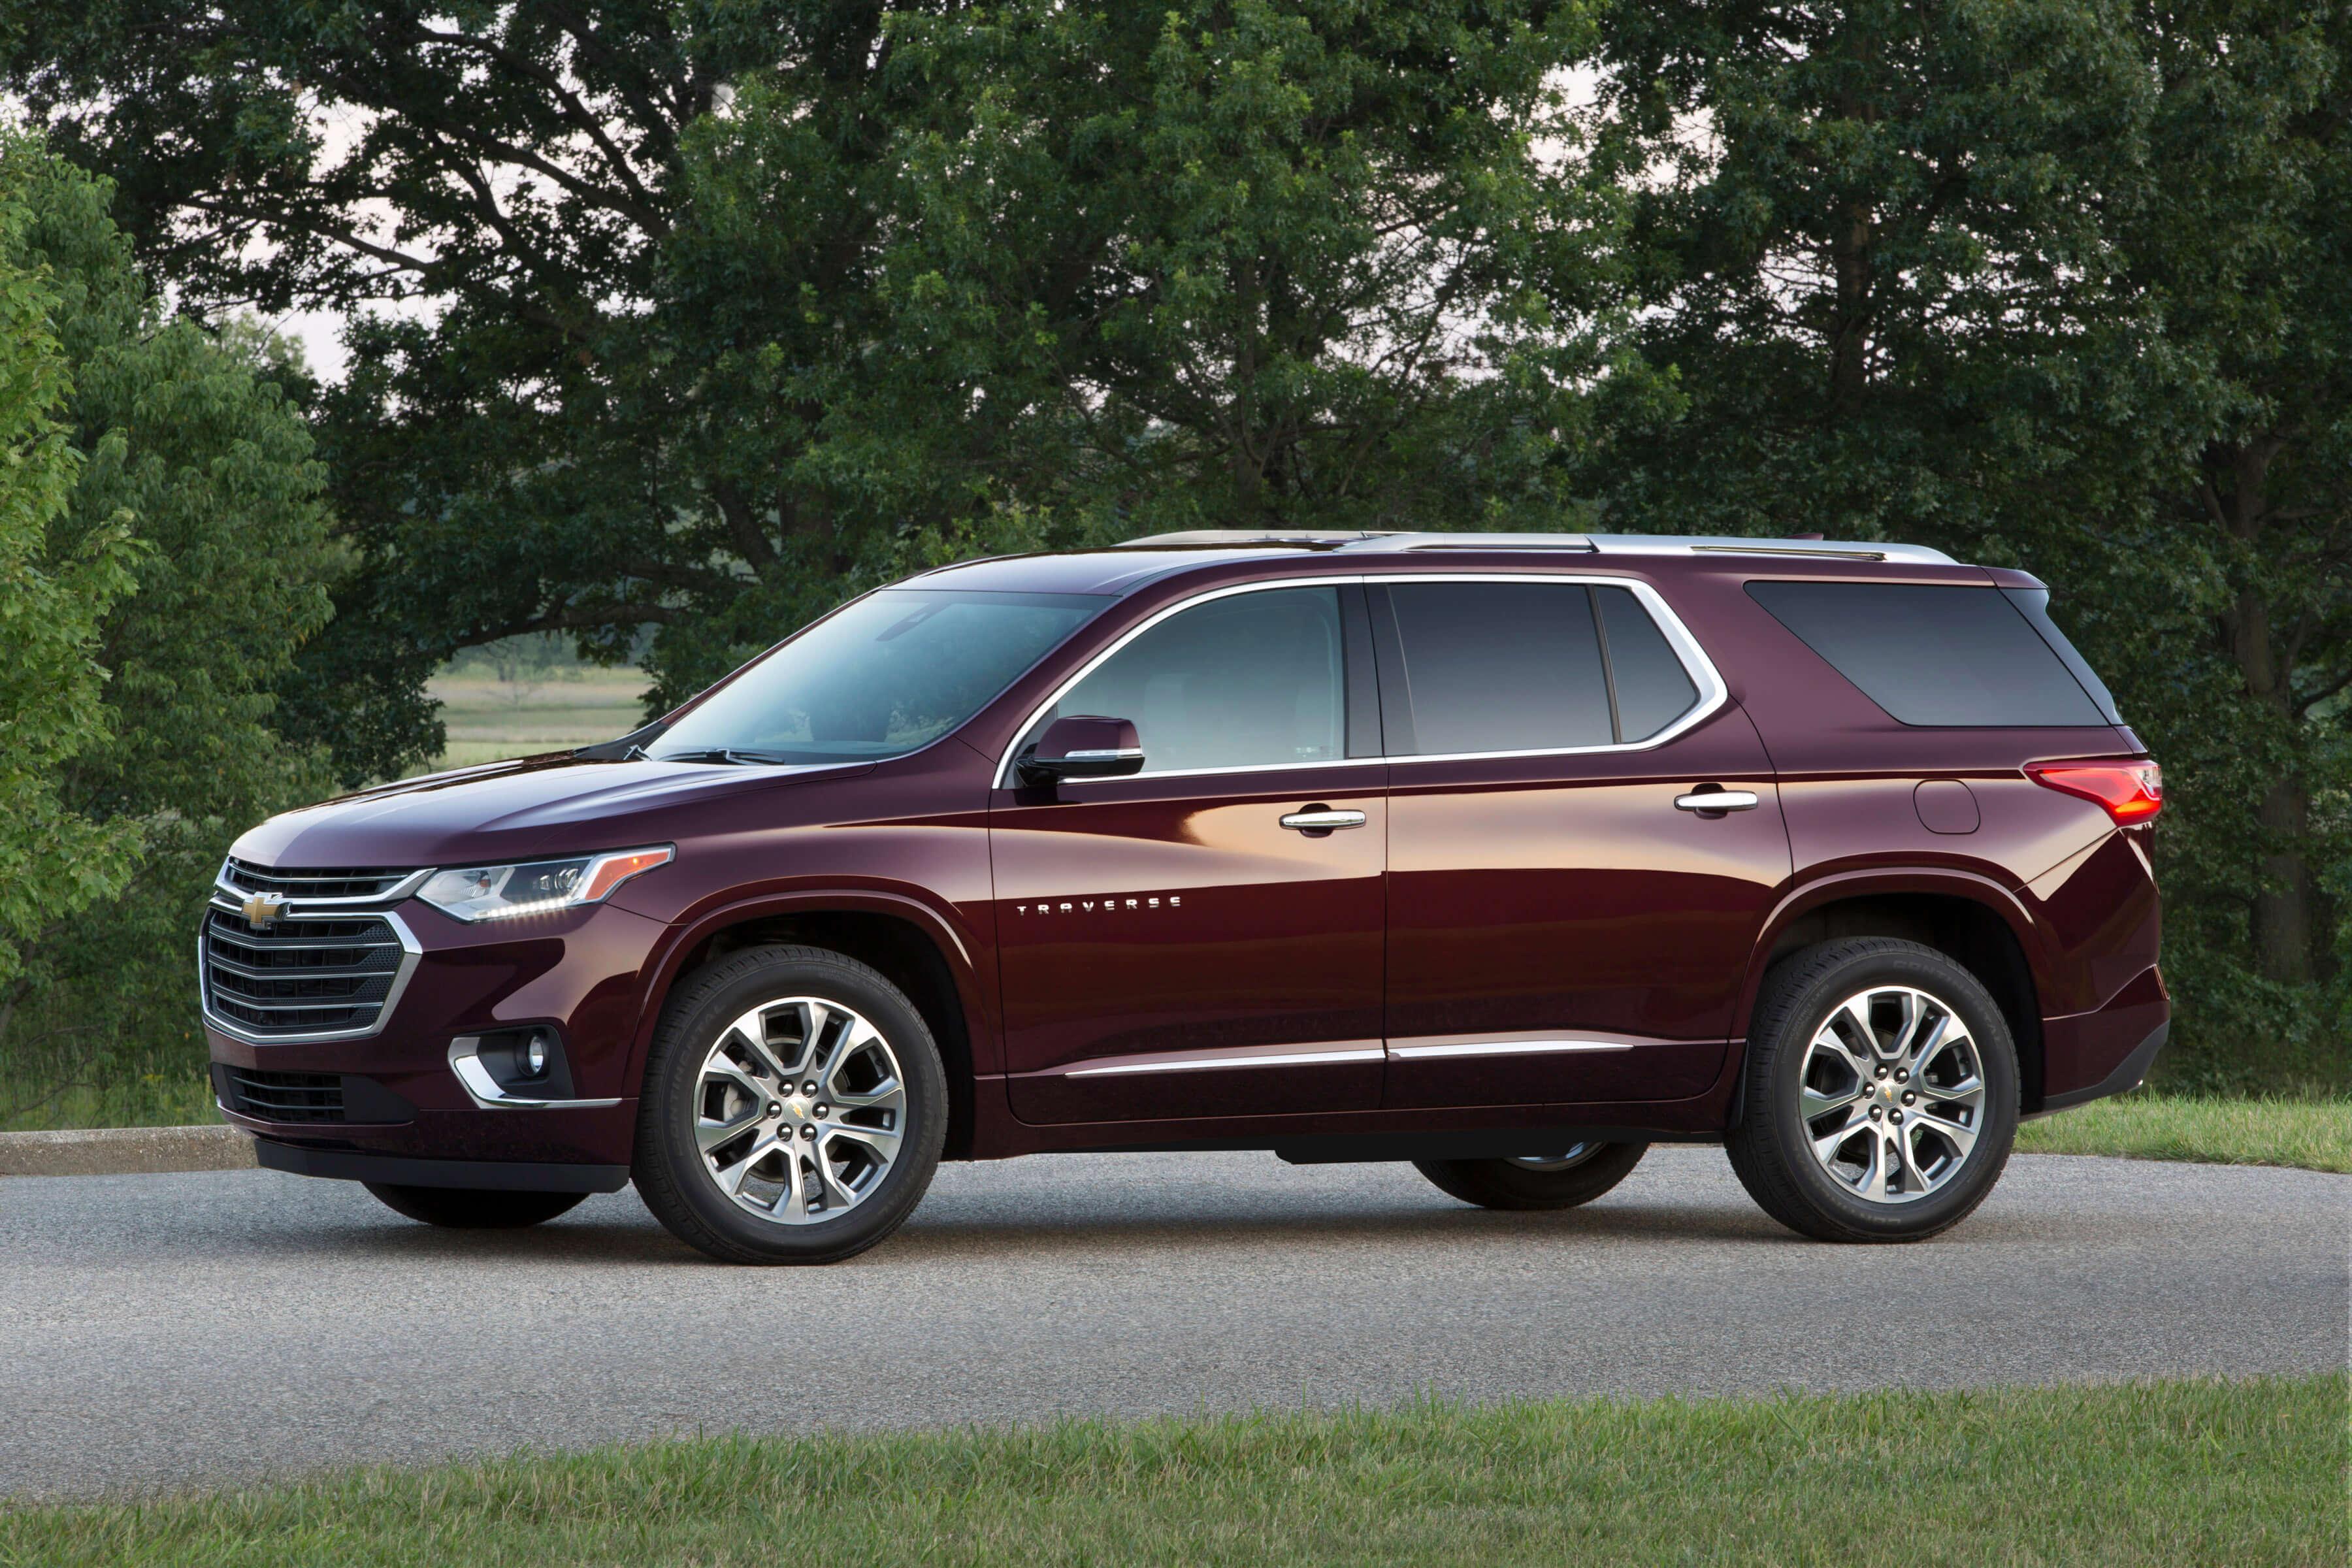 Chevrolet Traverse exterior specifications